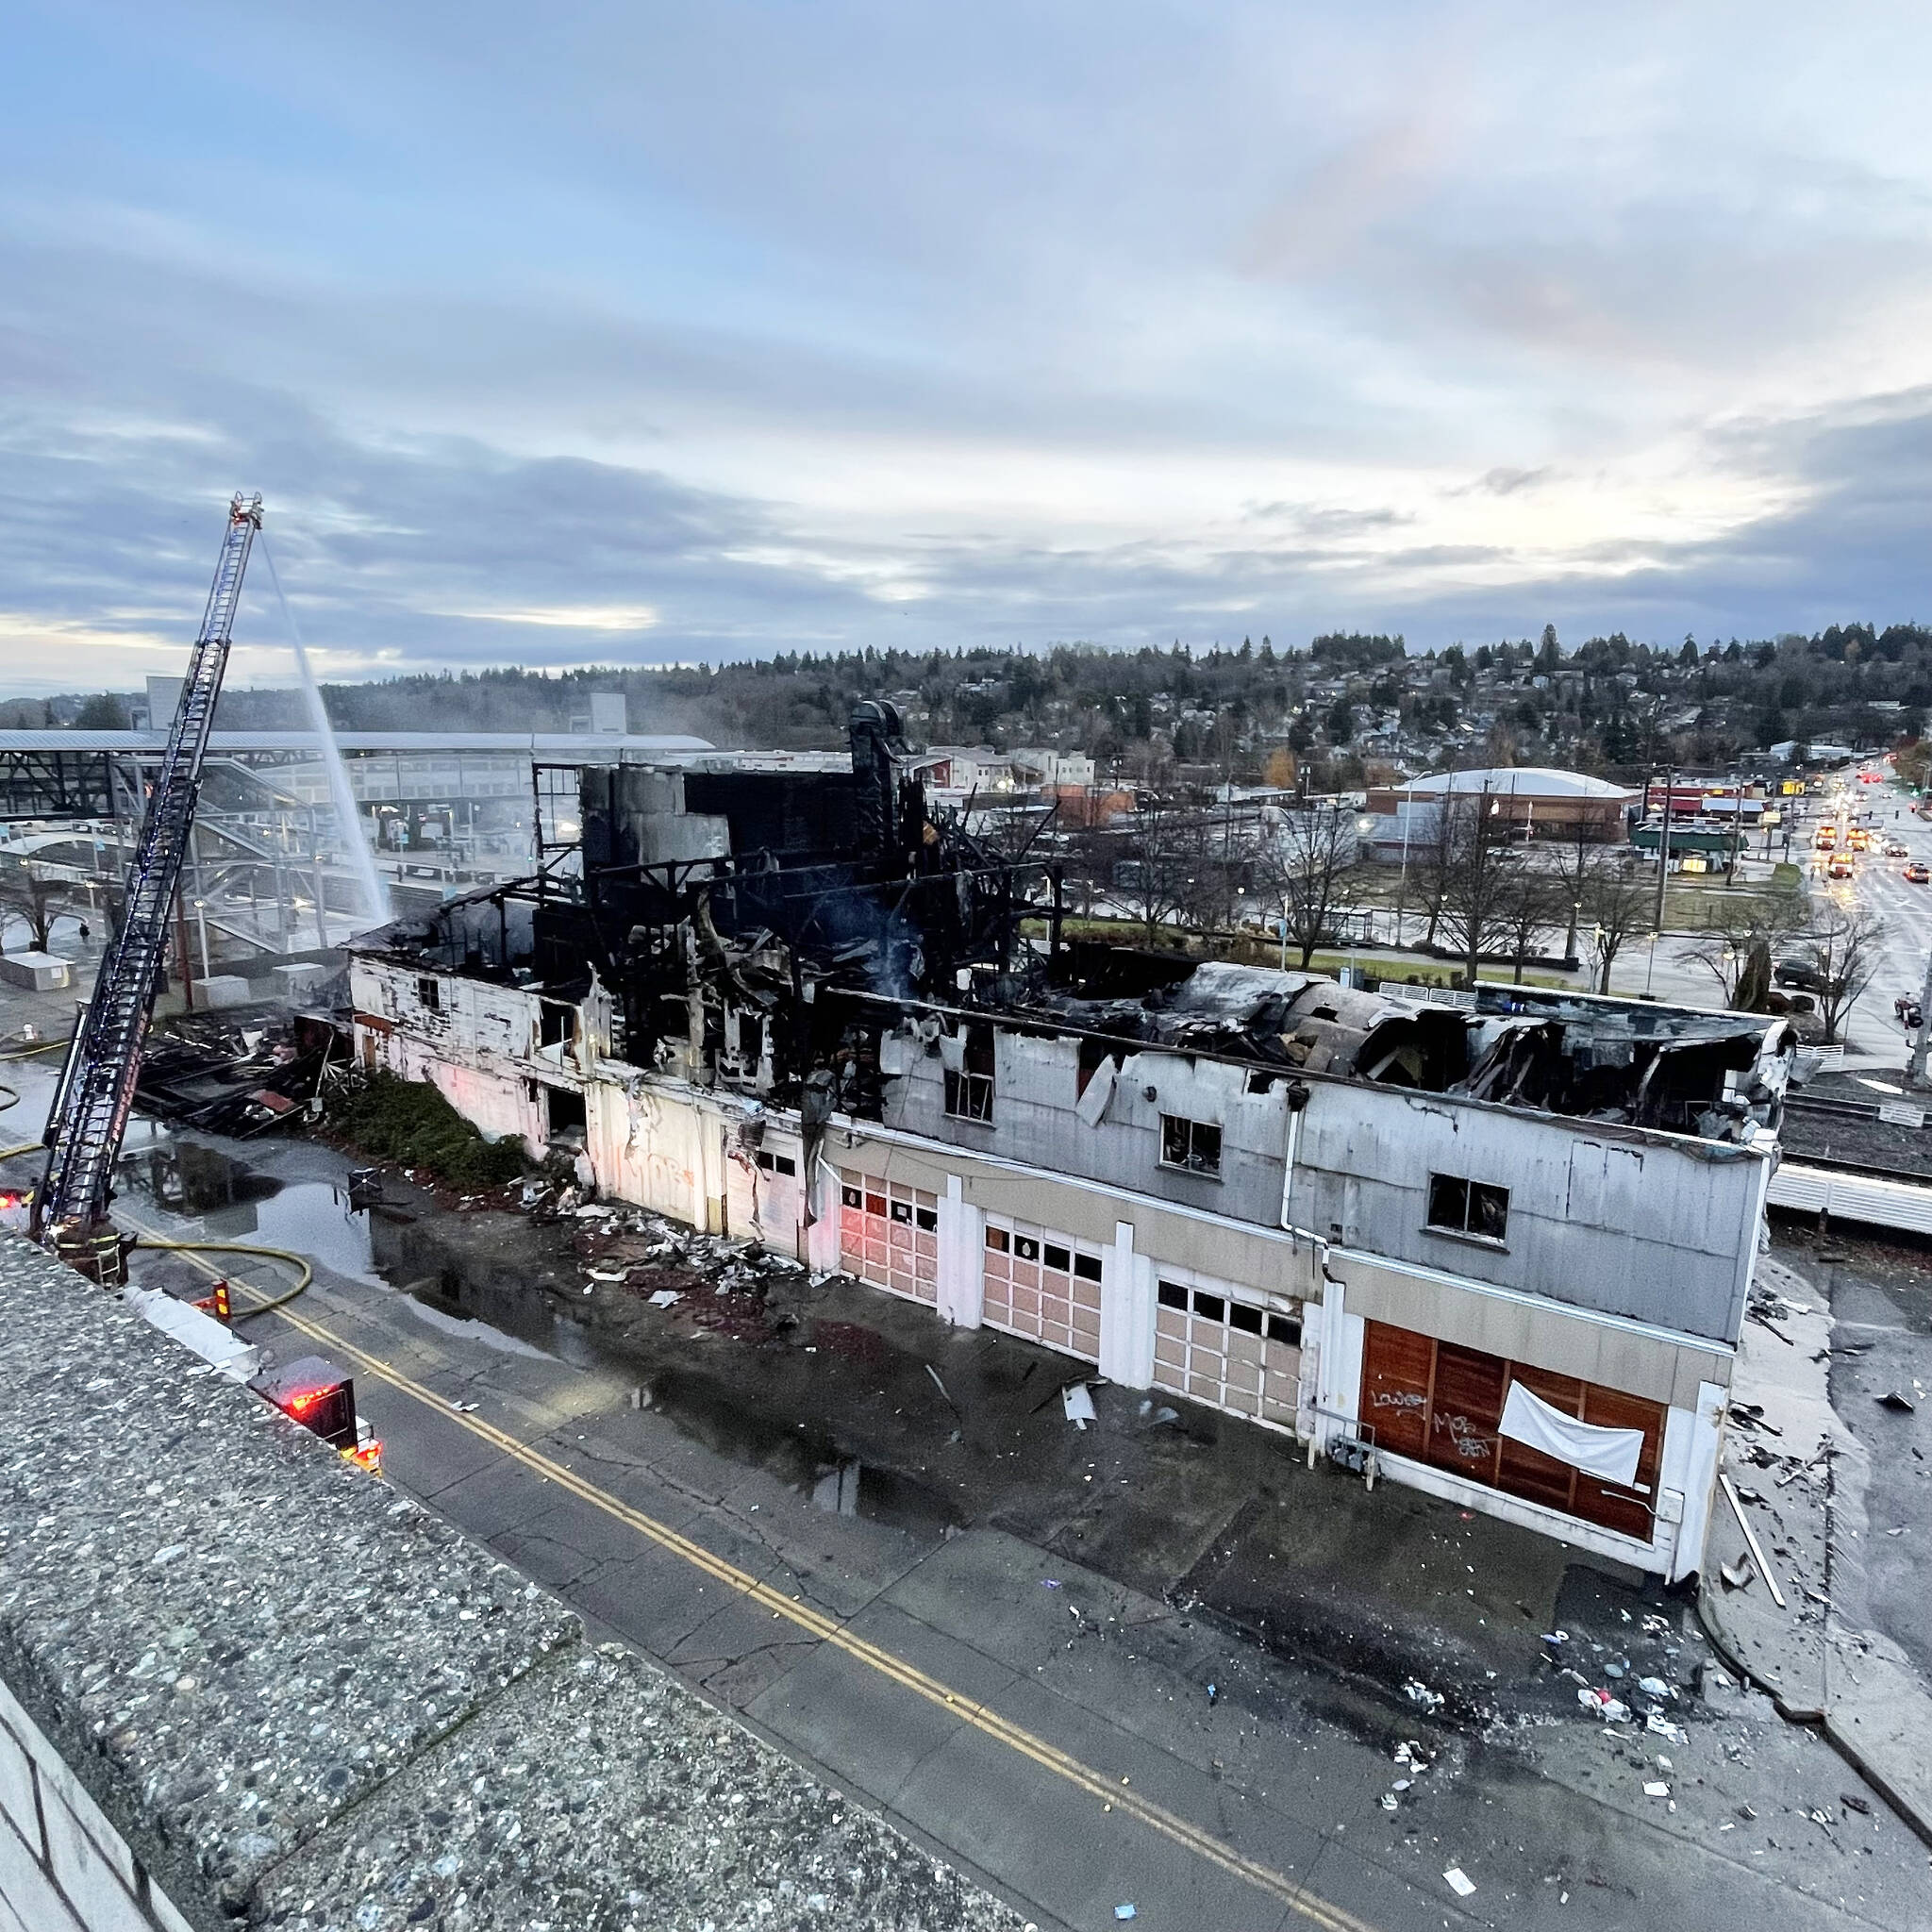 Fire destroyed a vacant warehouse early Friday morning, Dec. 9 near Kent Station. COURTESY PHOTO, Puget Sound Fire